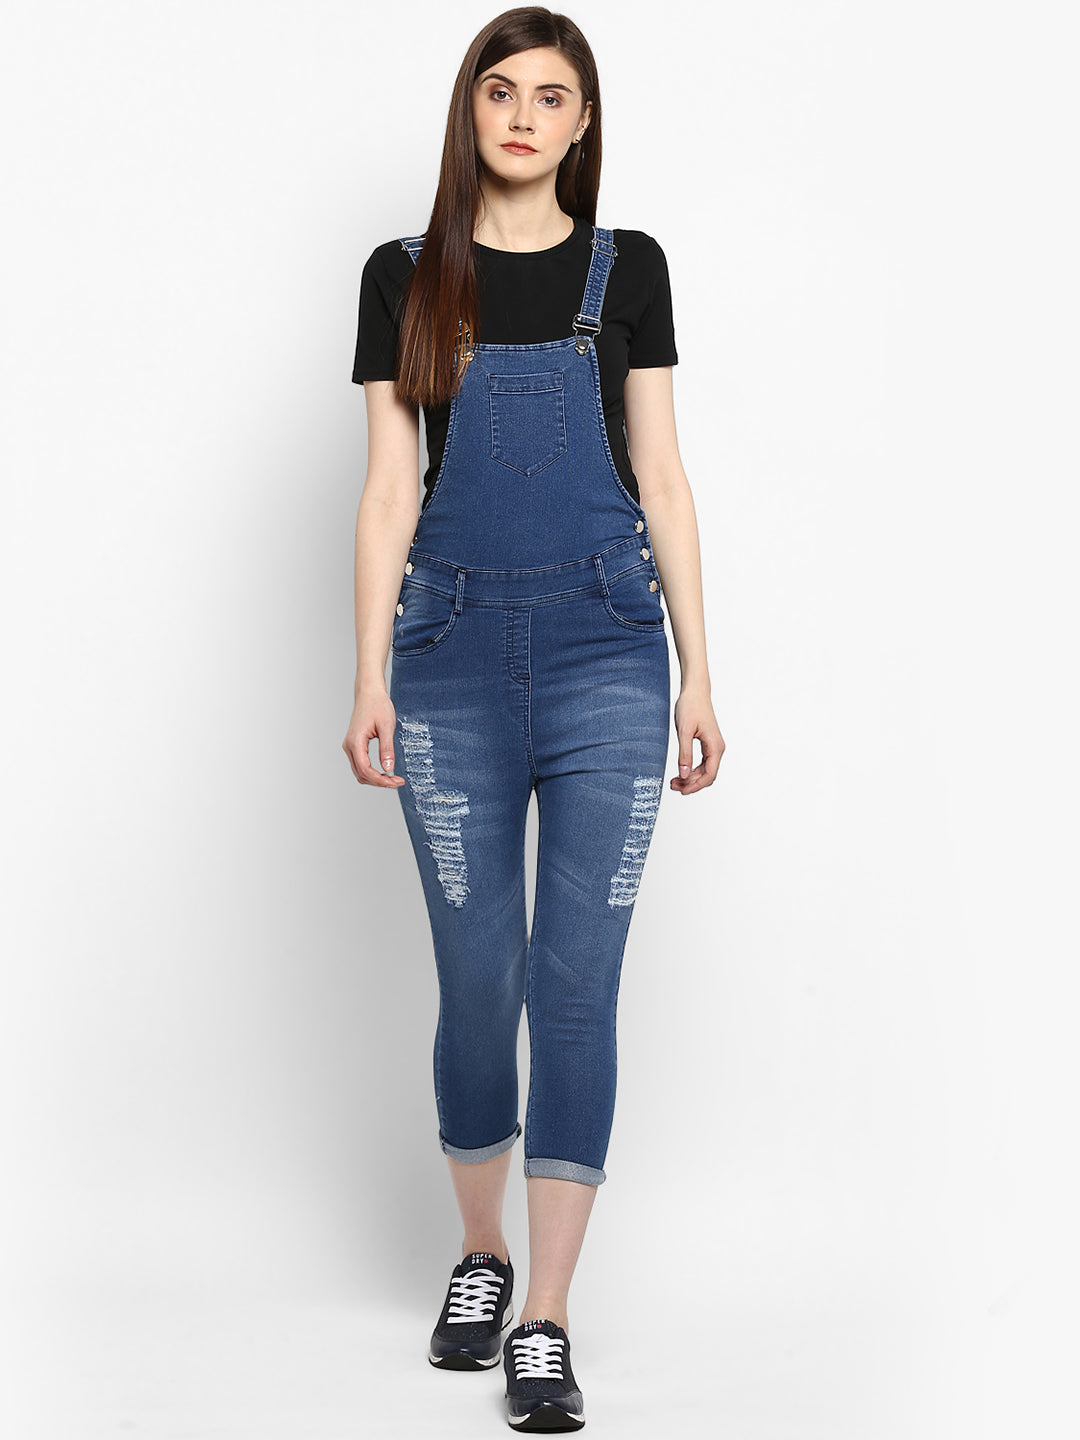 Women's Distressed Stretchable Denim Capri Style Dungarees(inner not provided)